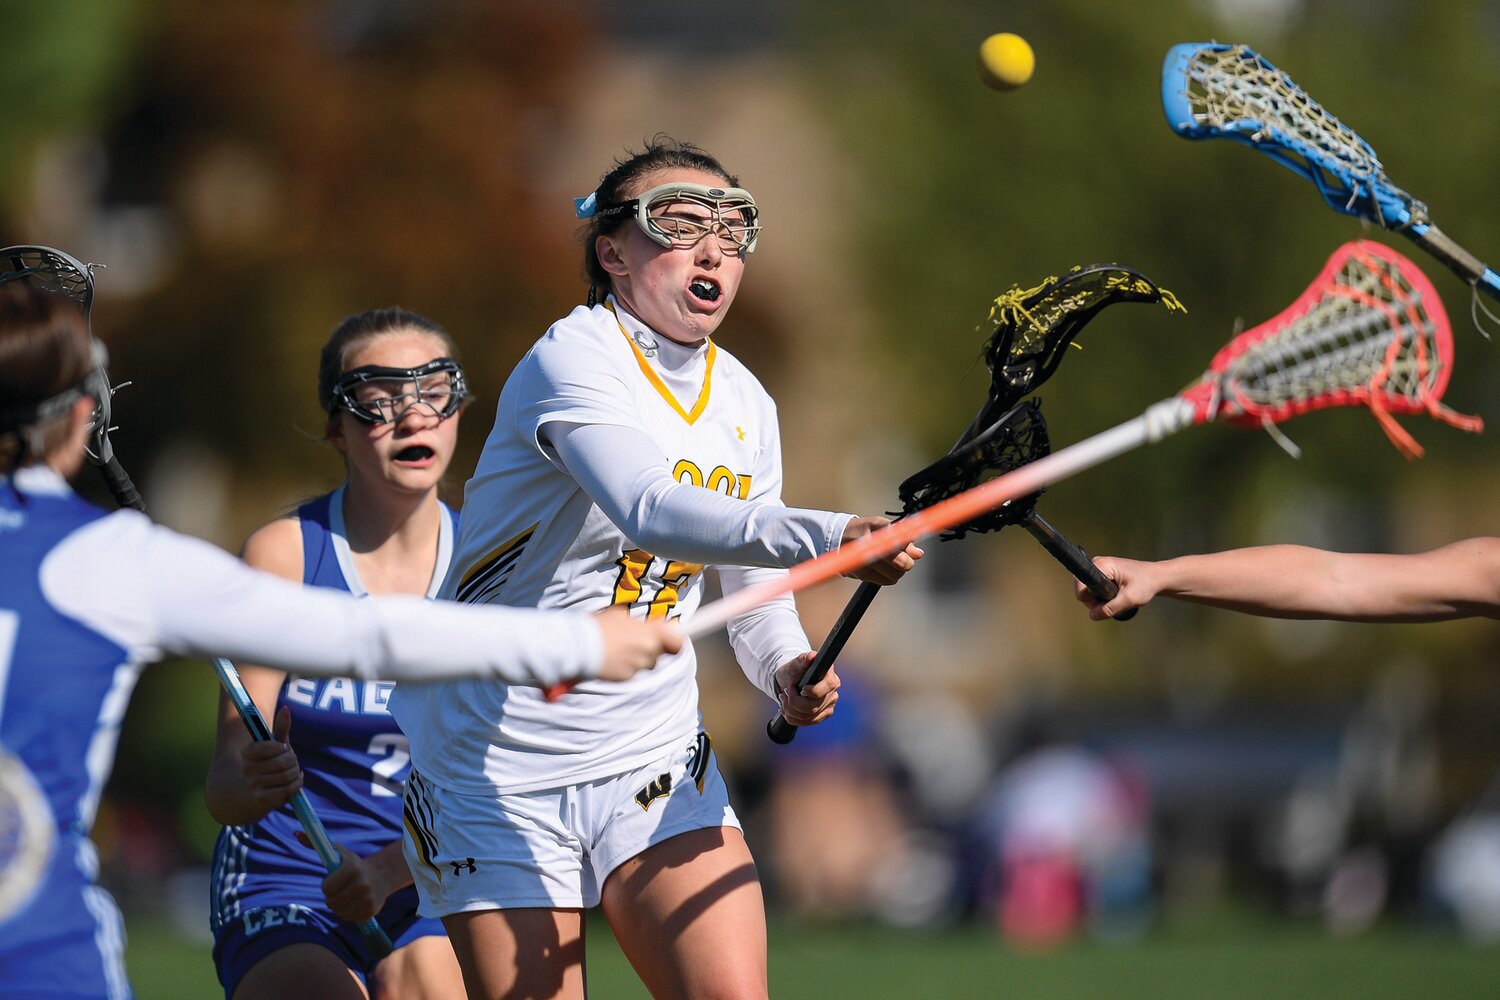 Archbishop Wood’s Grace Hoeger scores on a shot in front of the defense of Conwell-Egan during the second period.